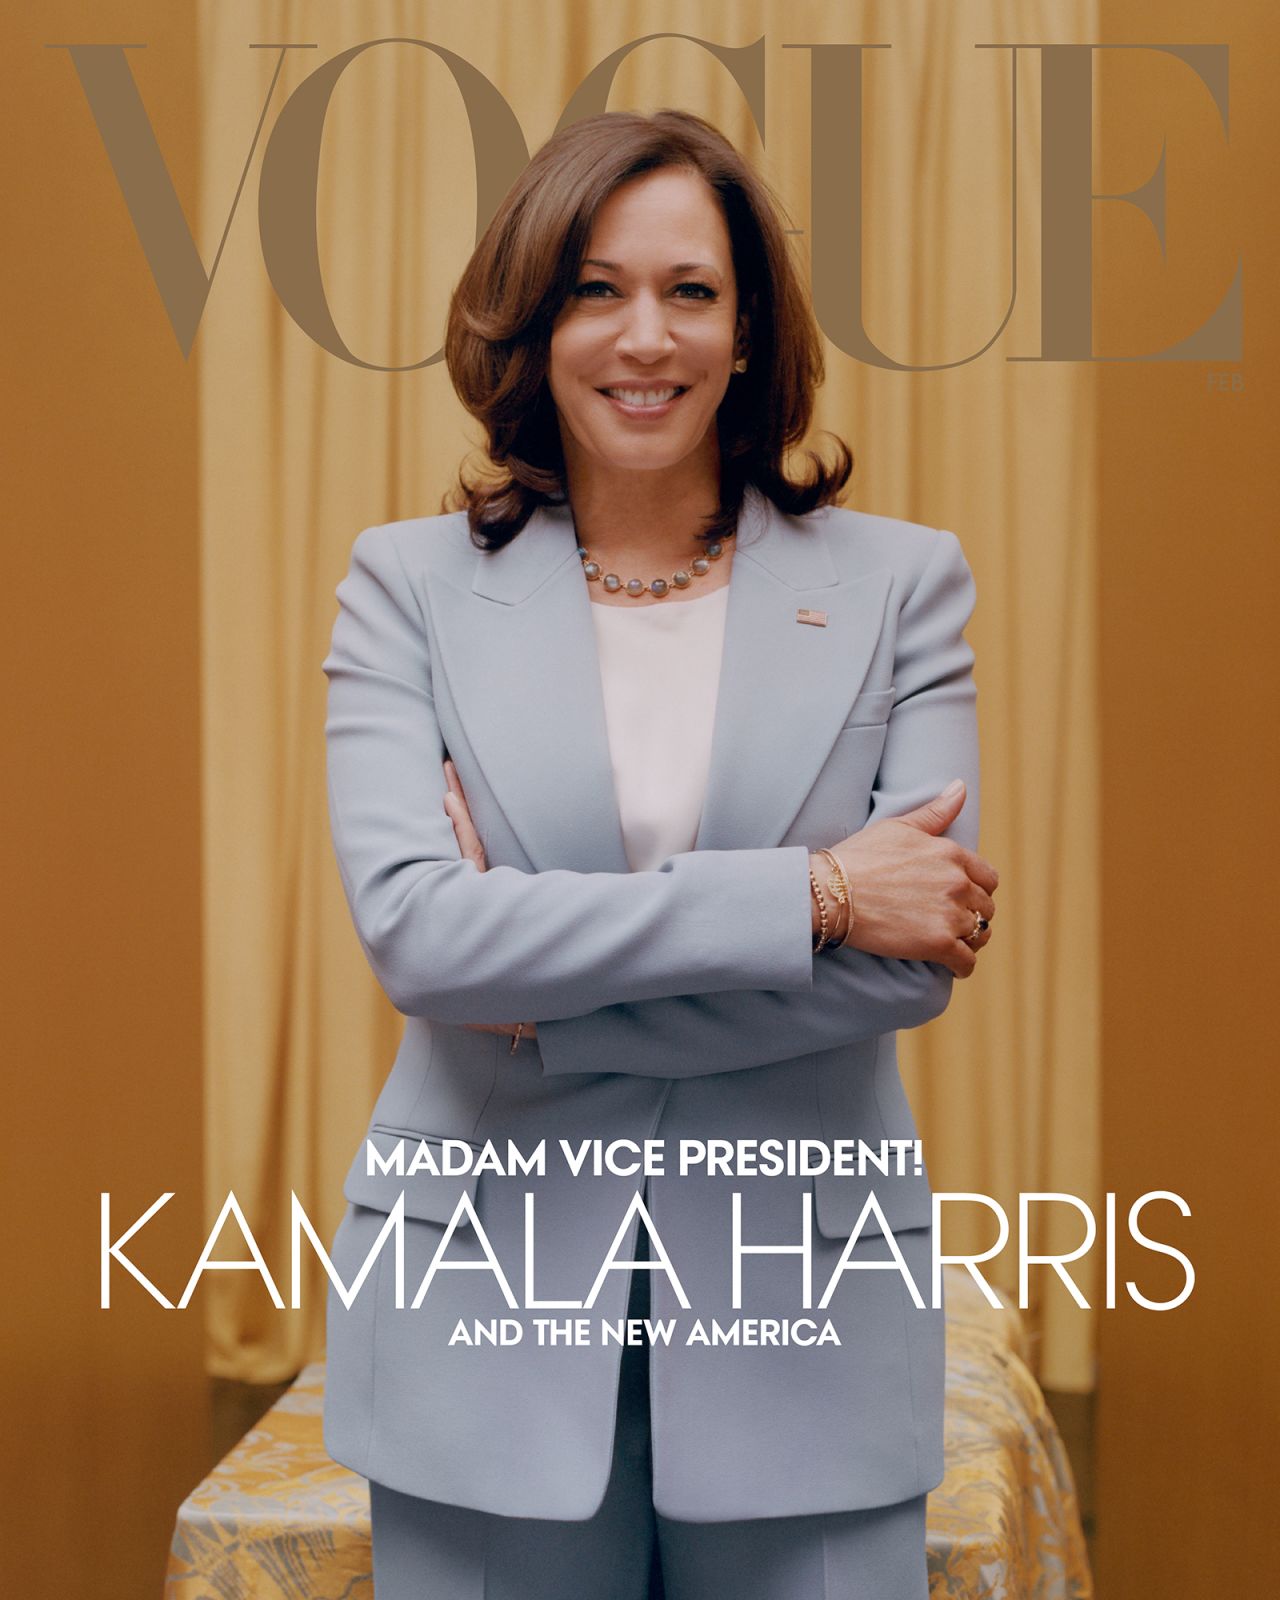 Vogue revealed a second "digital" cover featuring Harris in a blue suit.